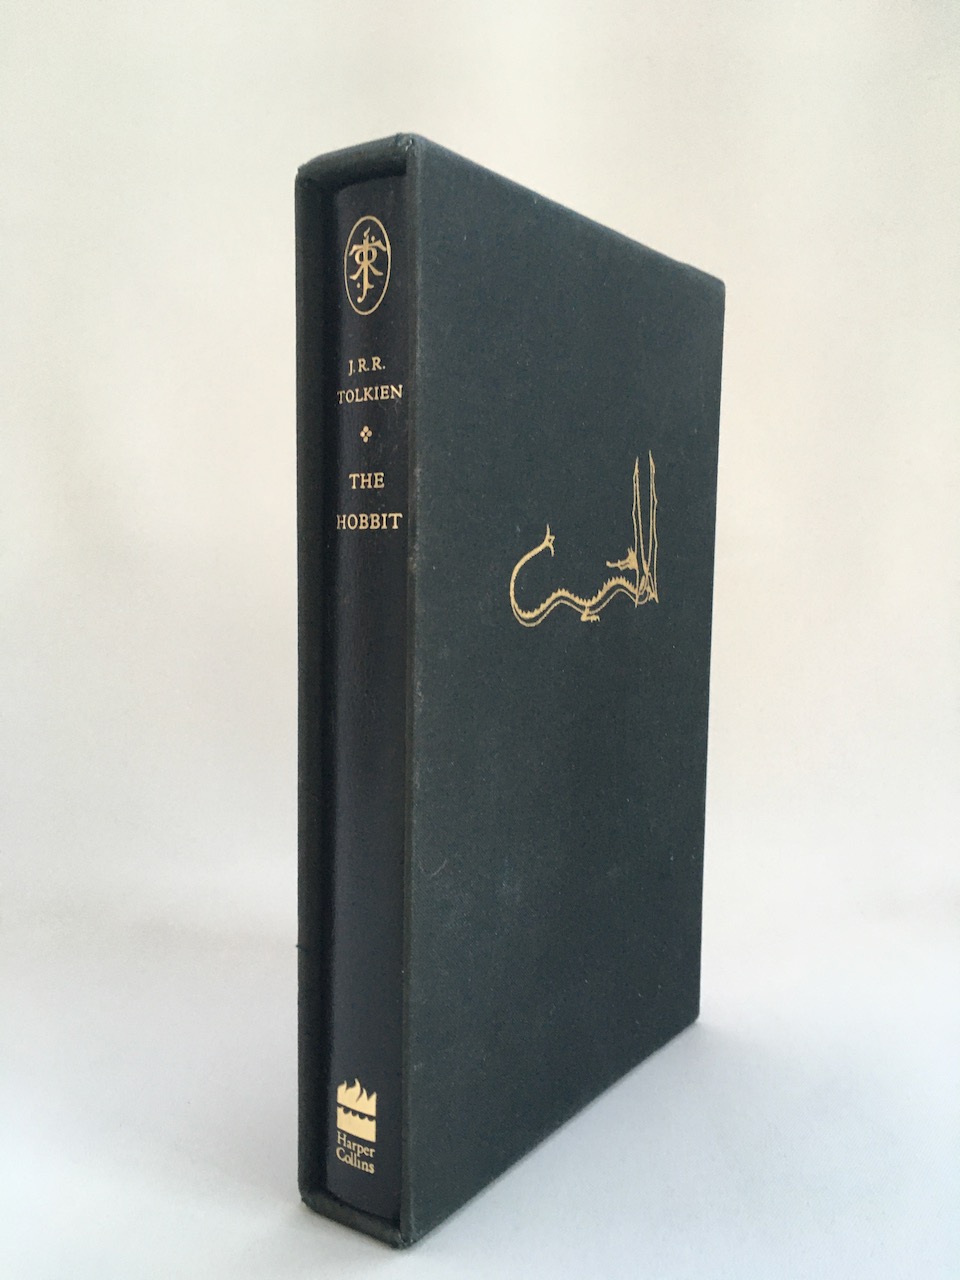 Published by Harper Collins in 1999 The Hobbit black deluxe edition, the 1st printing of the 1999 Deluxe Limited Edition, Limited to 2500 copies worldwide